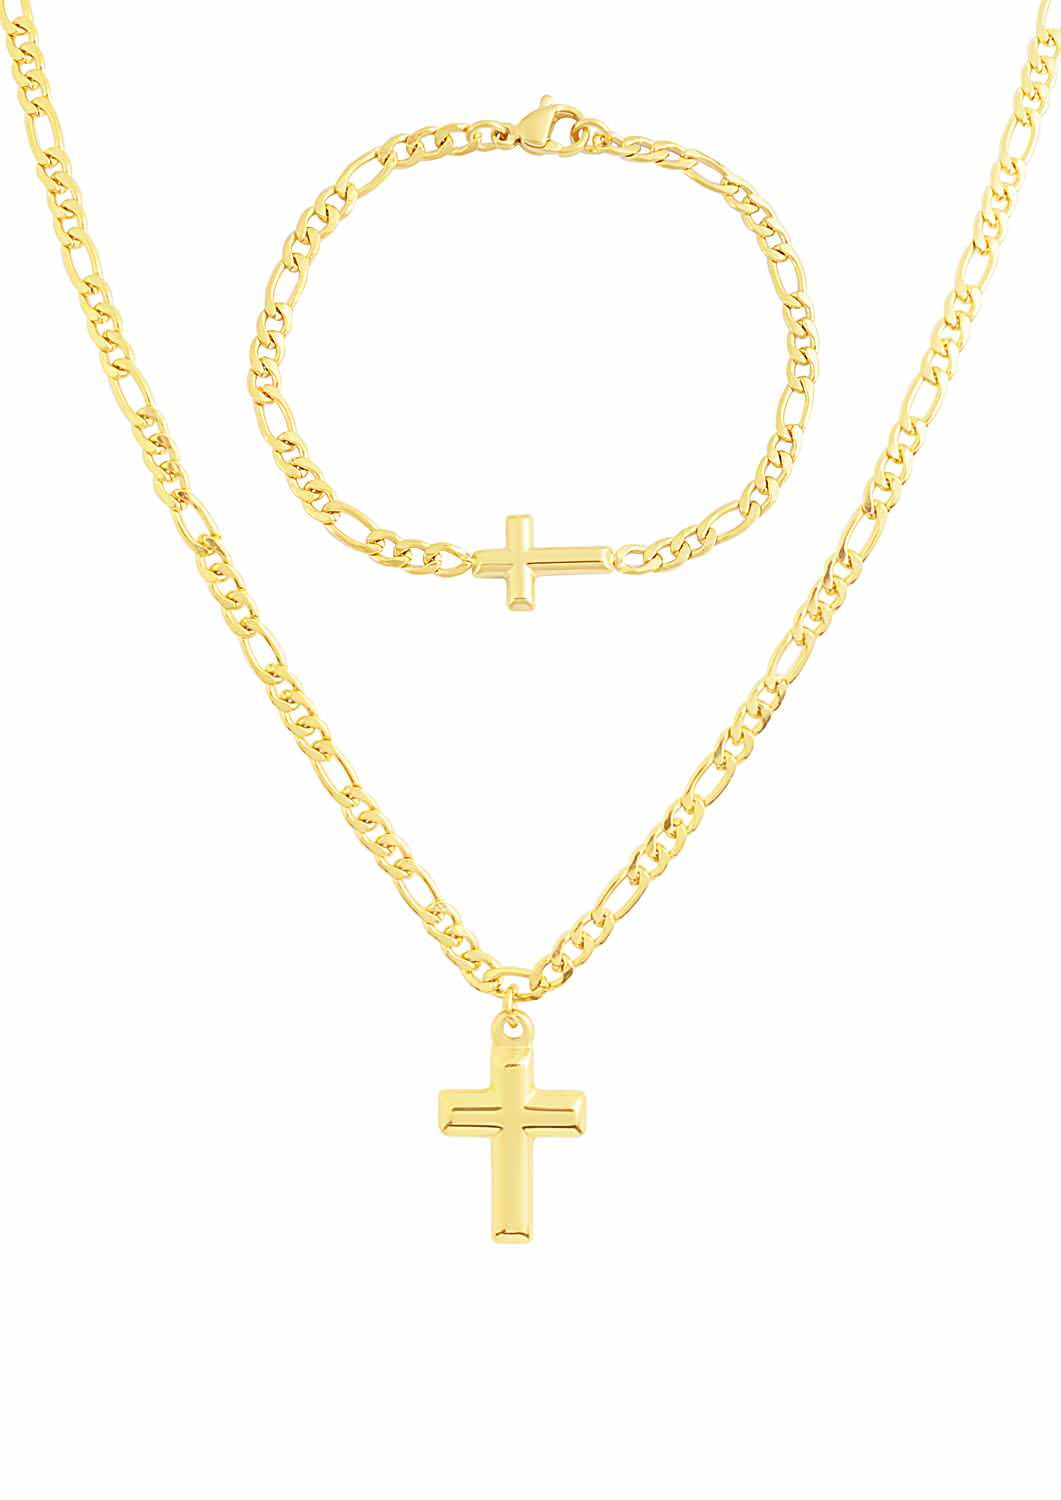 JOTW Small Gold Iced Out Jesus Cross Pendant with a 24 Inch 5mm Figaro Chain Necklace